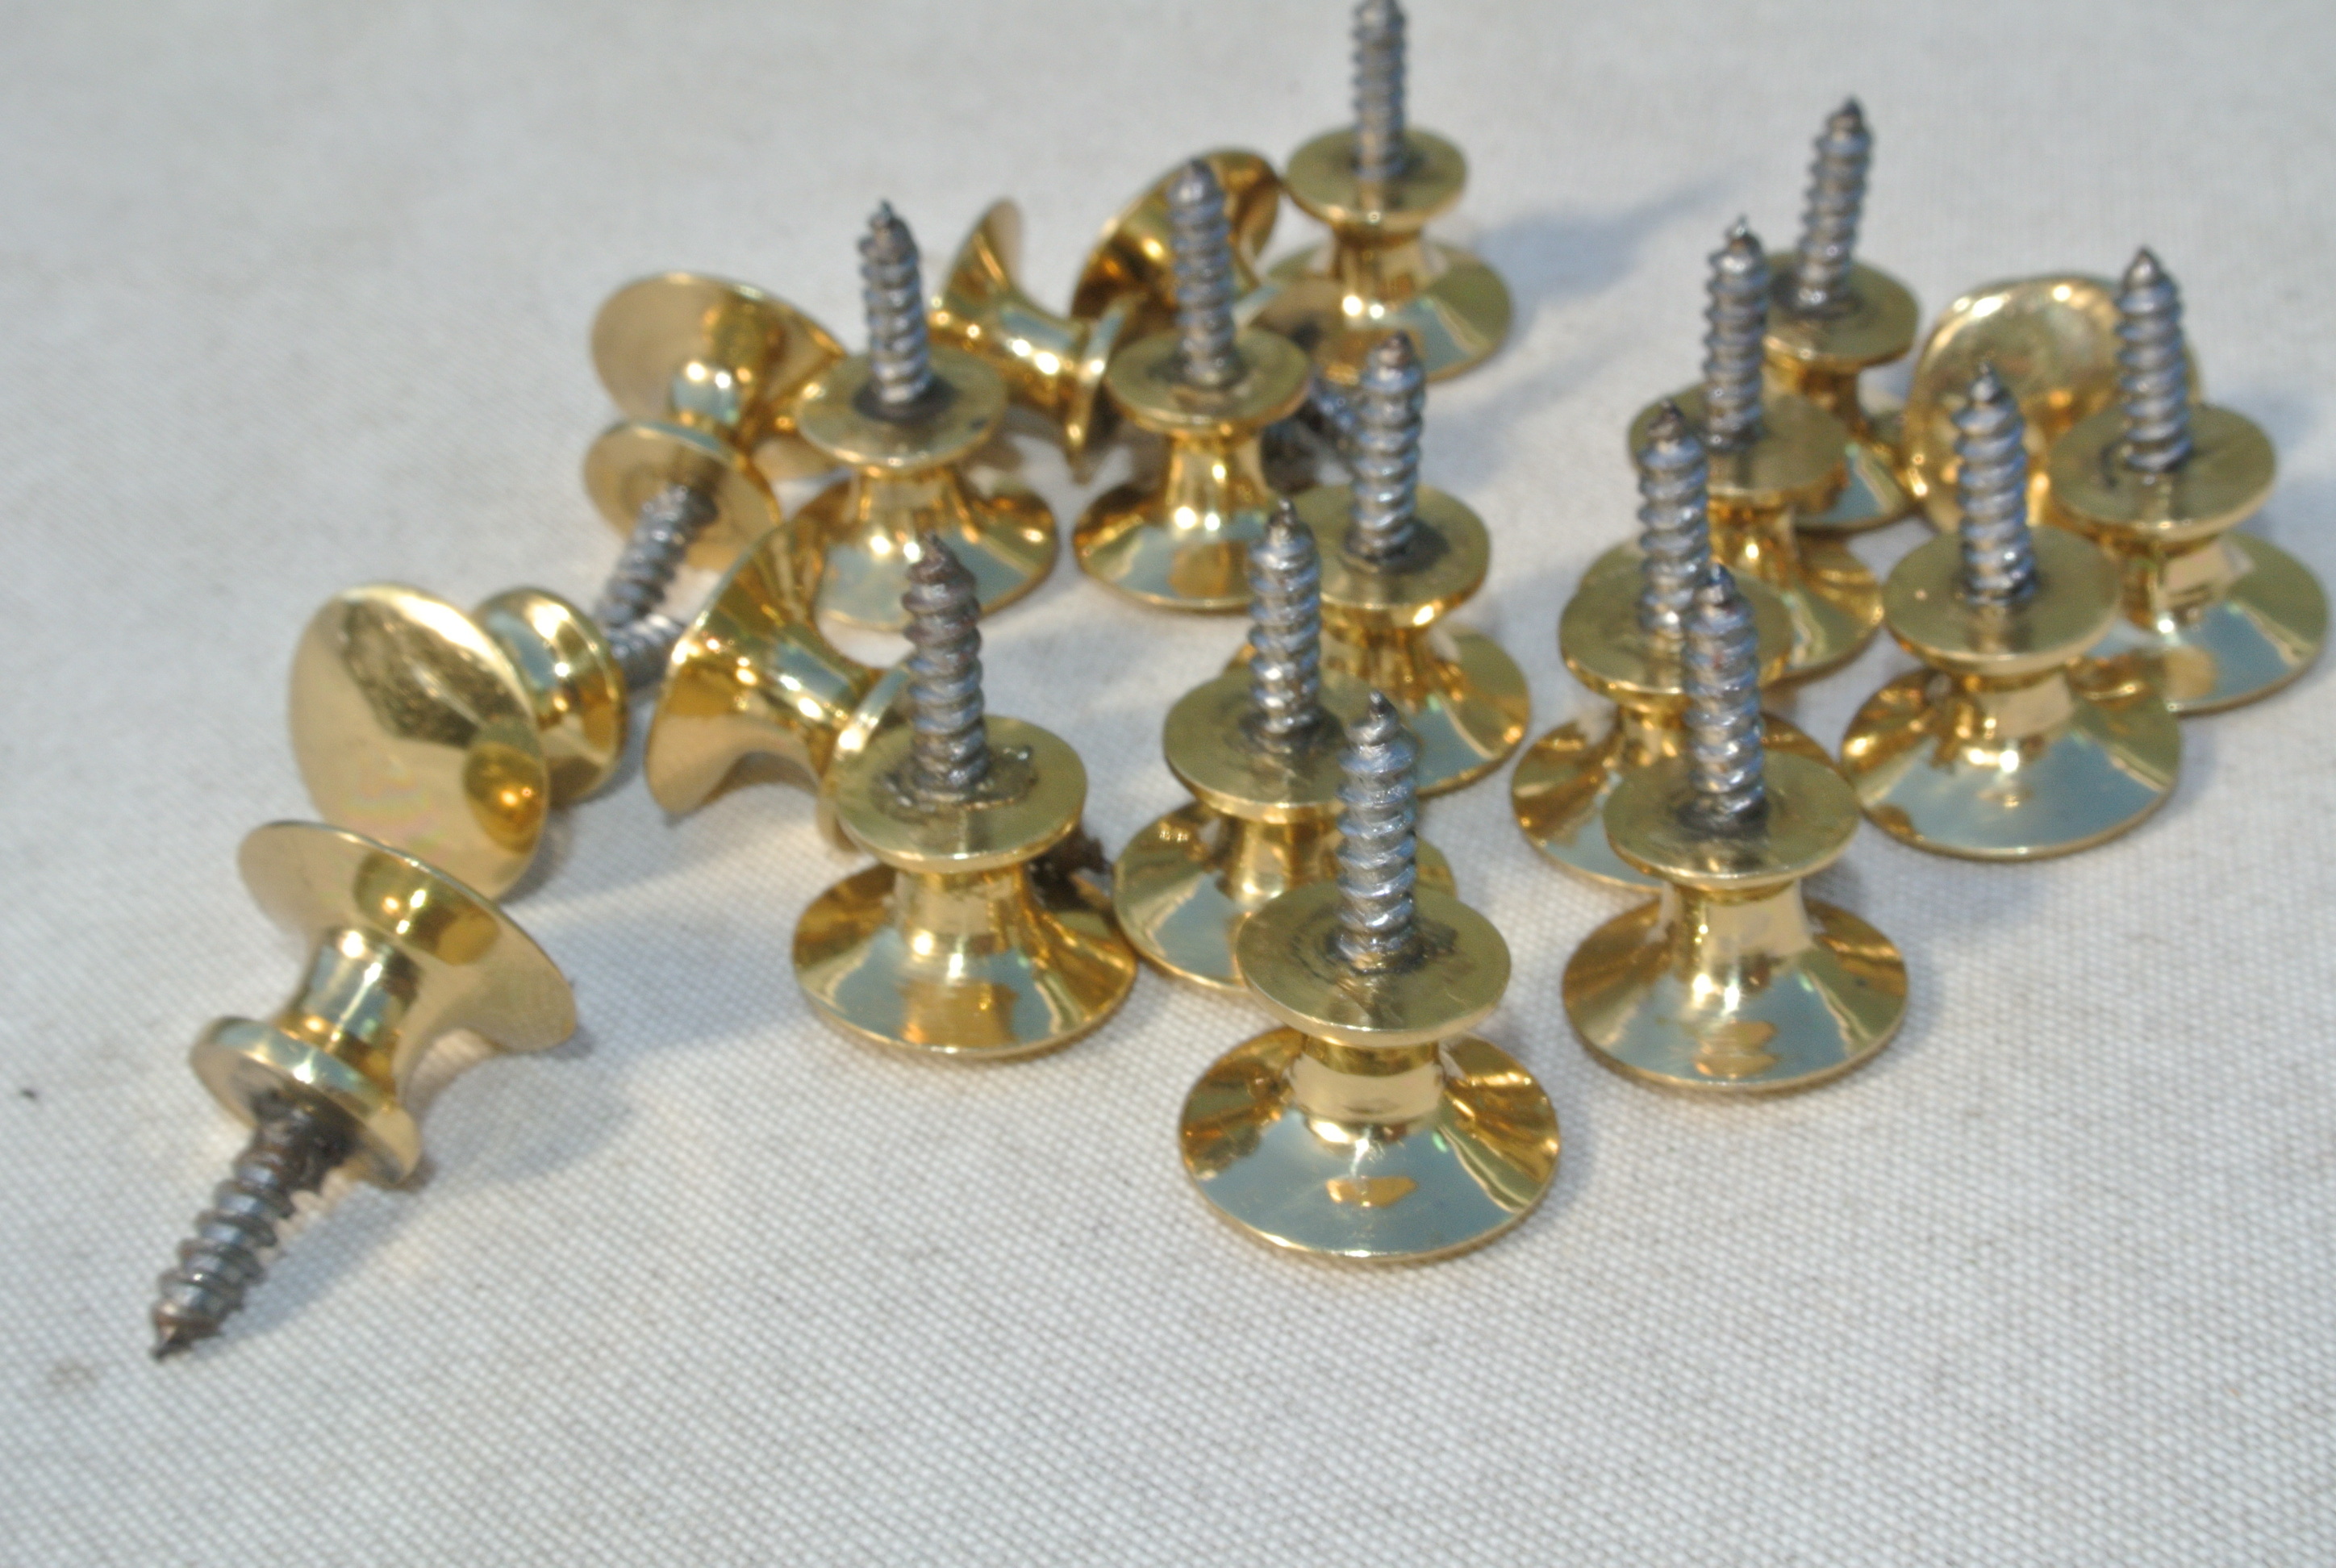 20 very TINY screw KNOBS pulls handles antique solid heavy brass drawer